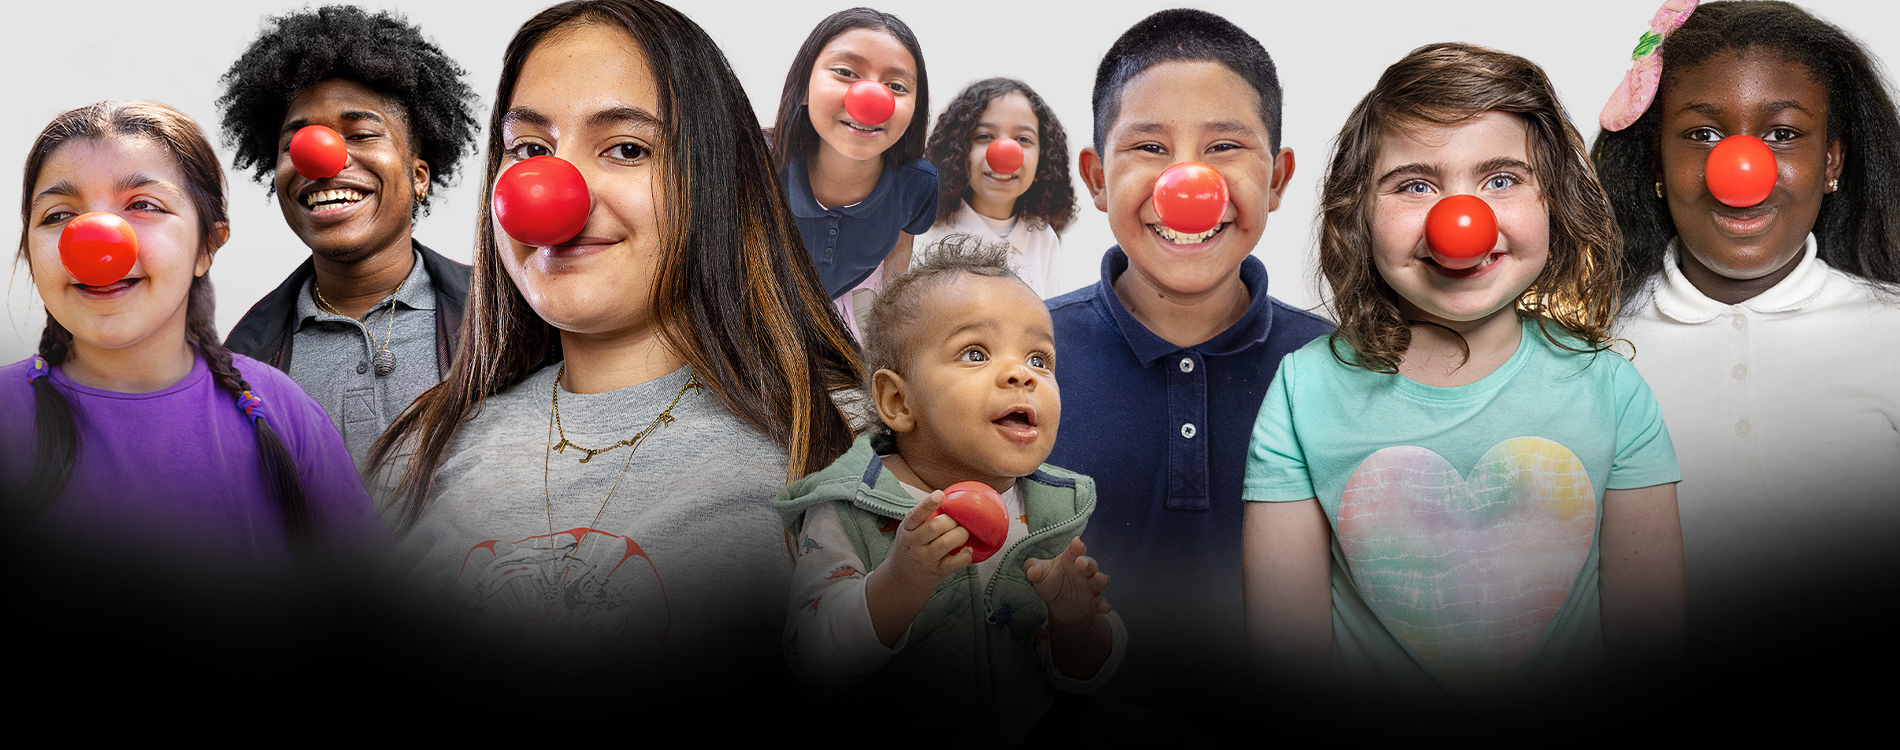 Let's Build a Healthy Future All Children | Red Nose Day